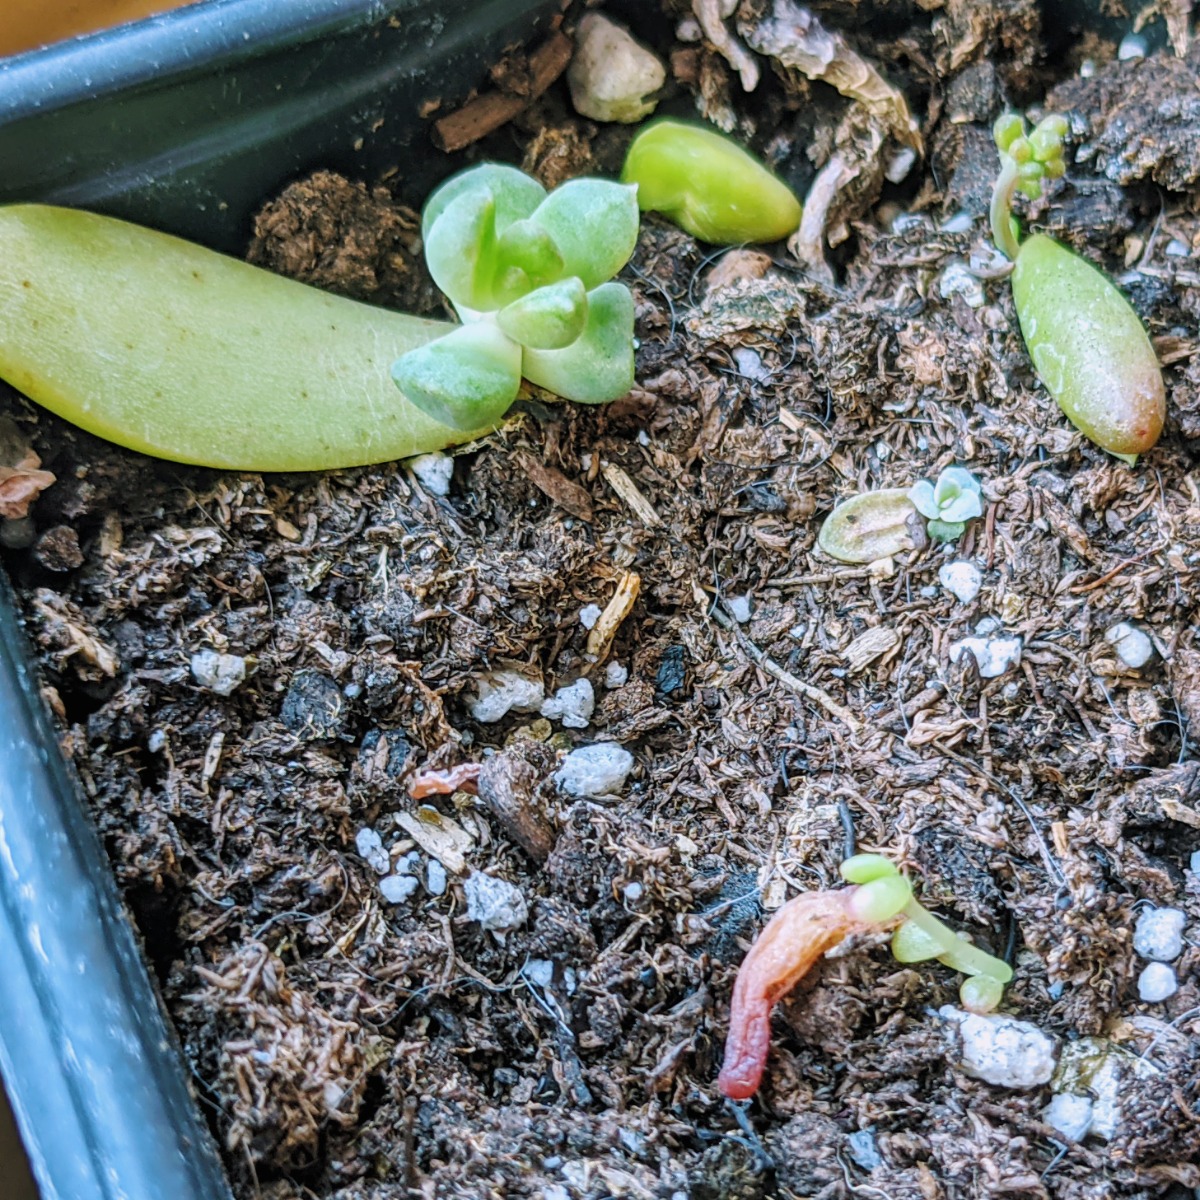 Lots of baby succulents starting from leaves